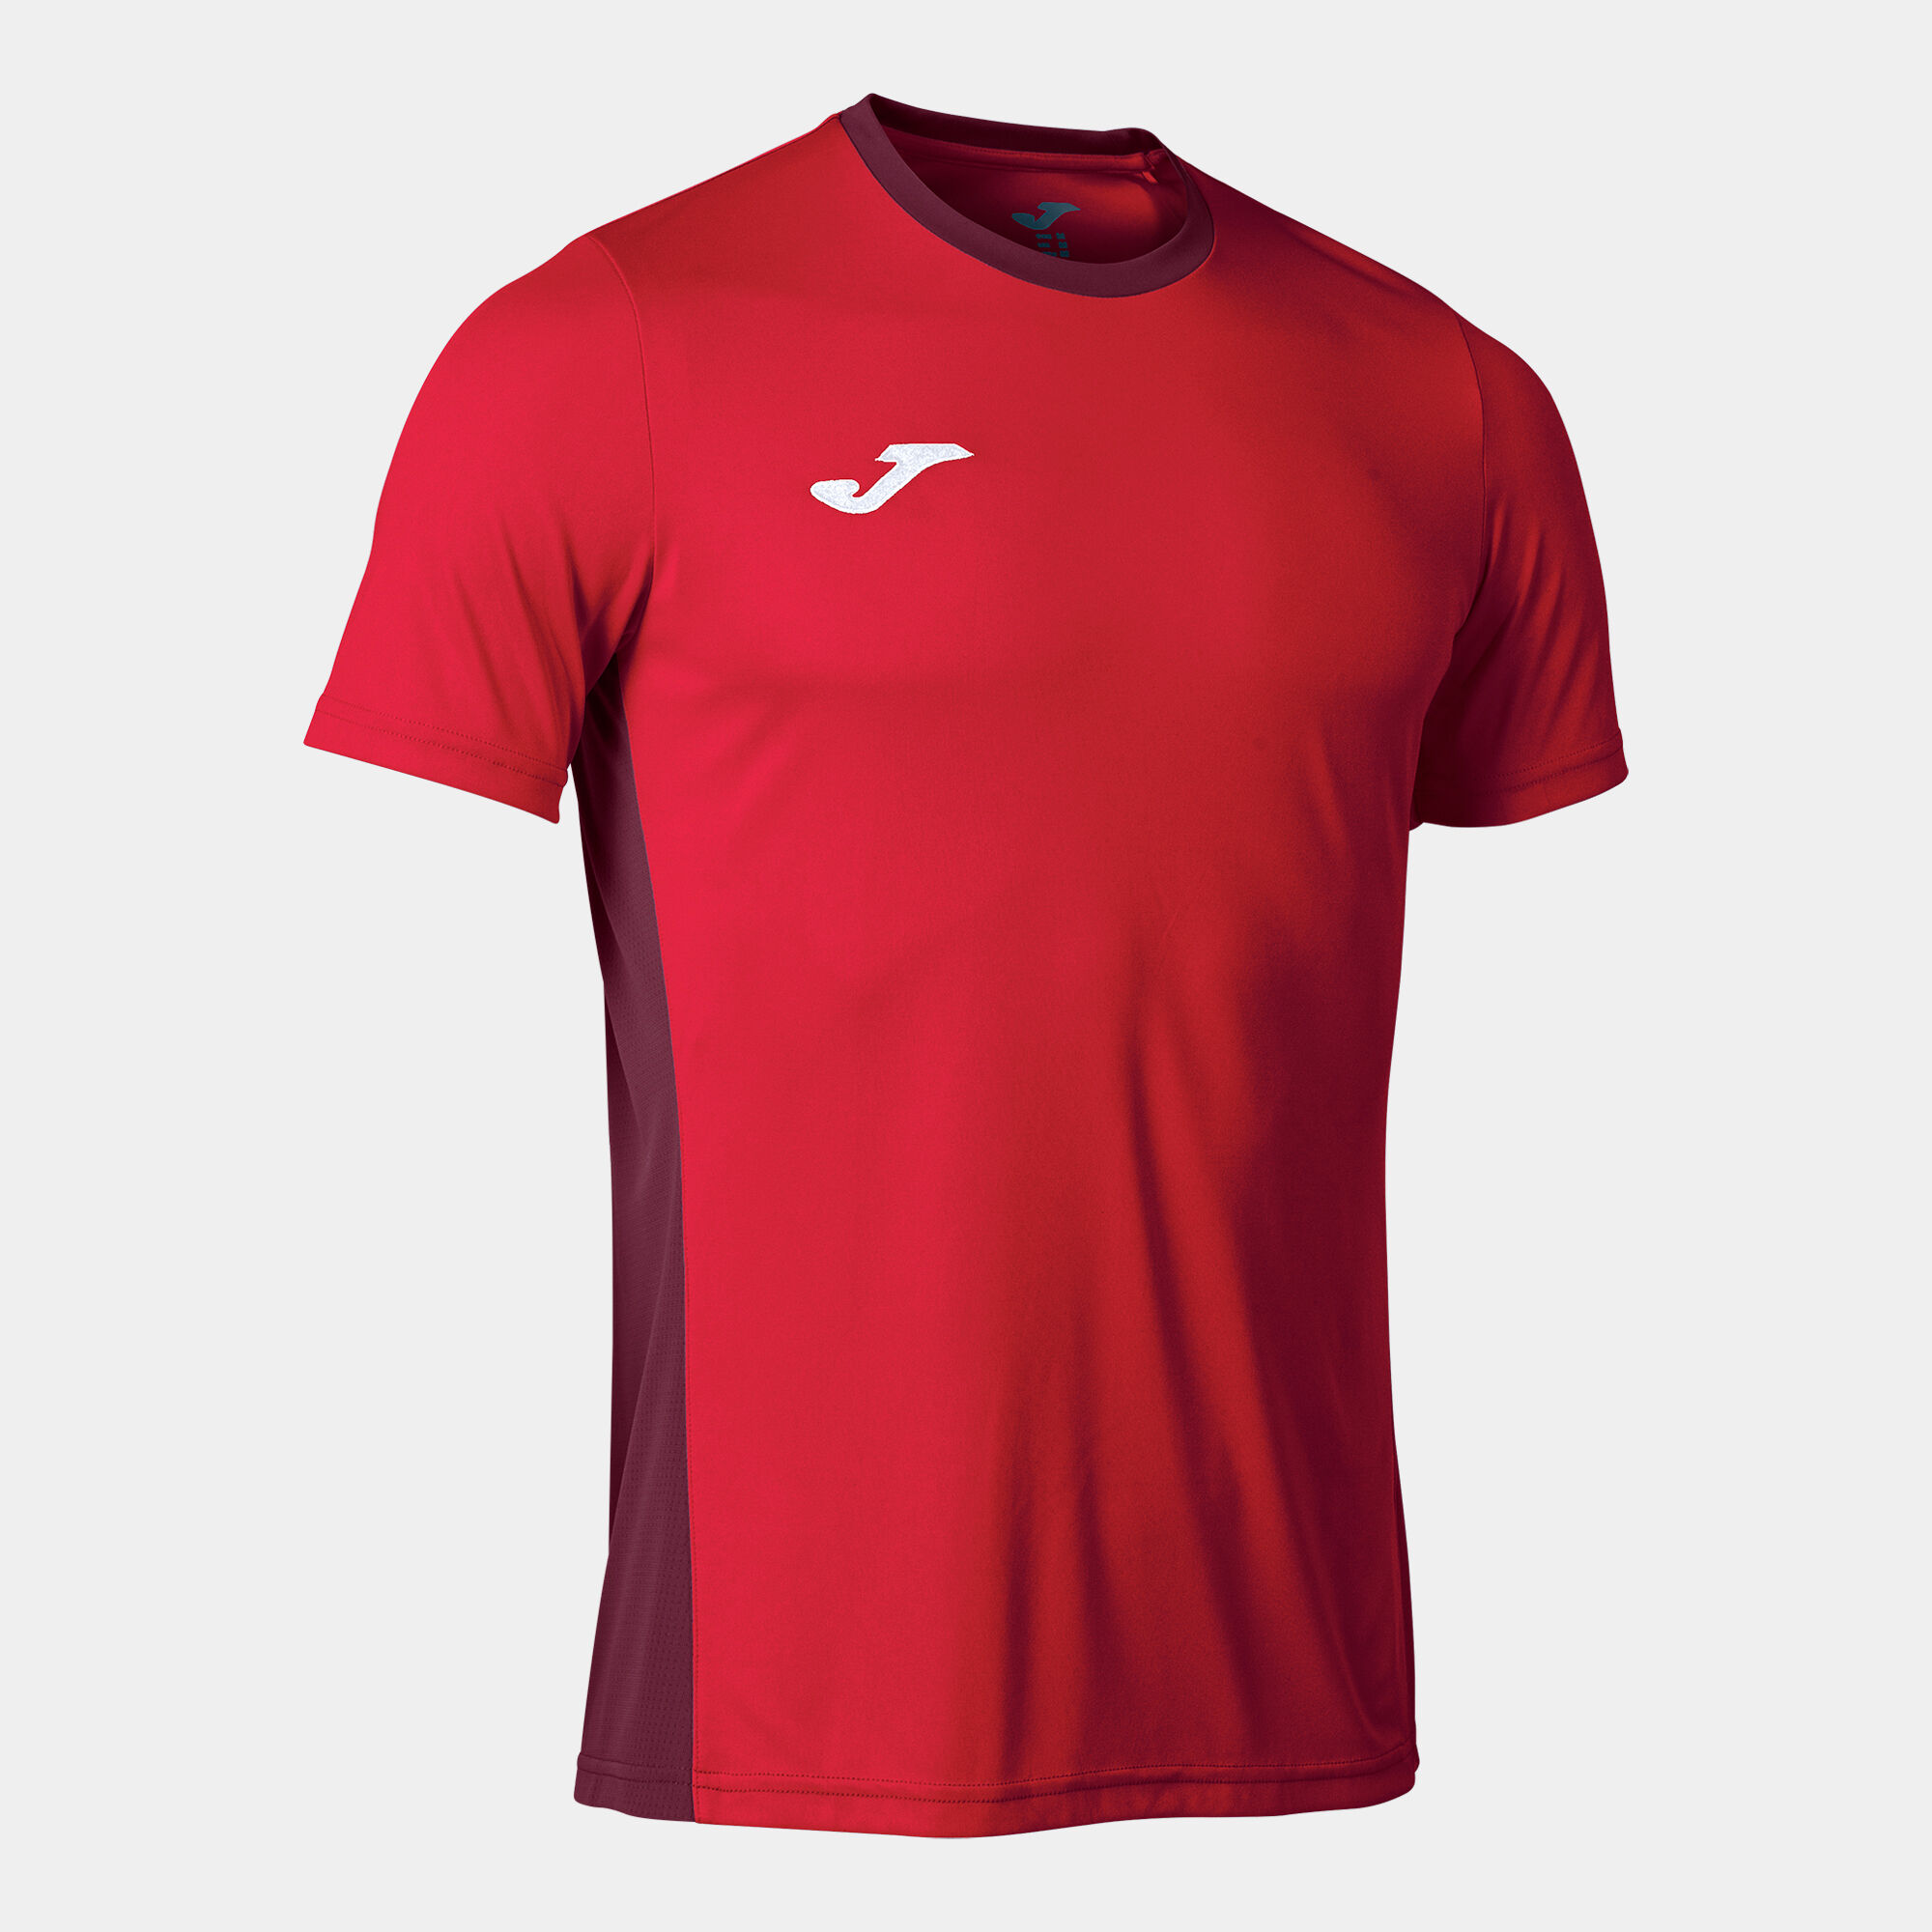 Maillot manches courtes homme Winner II rouge